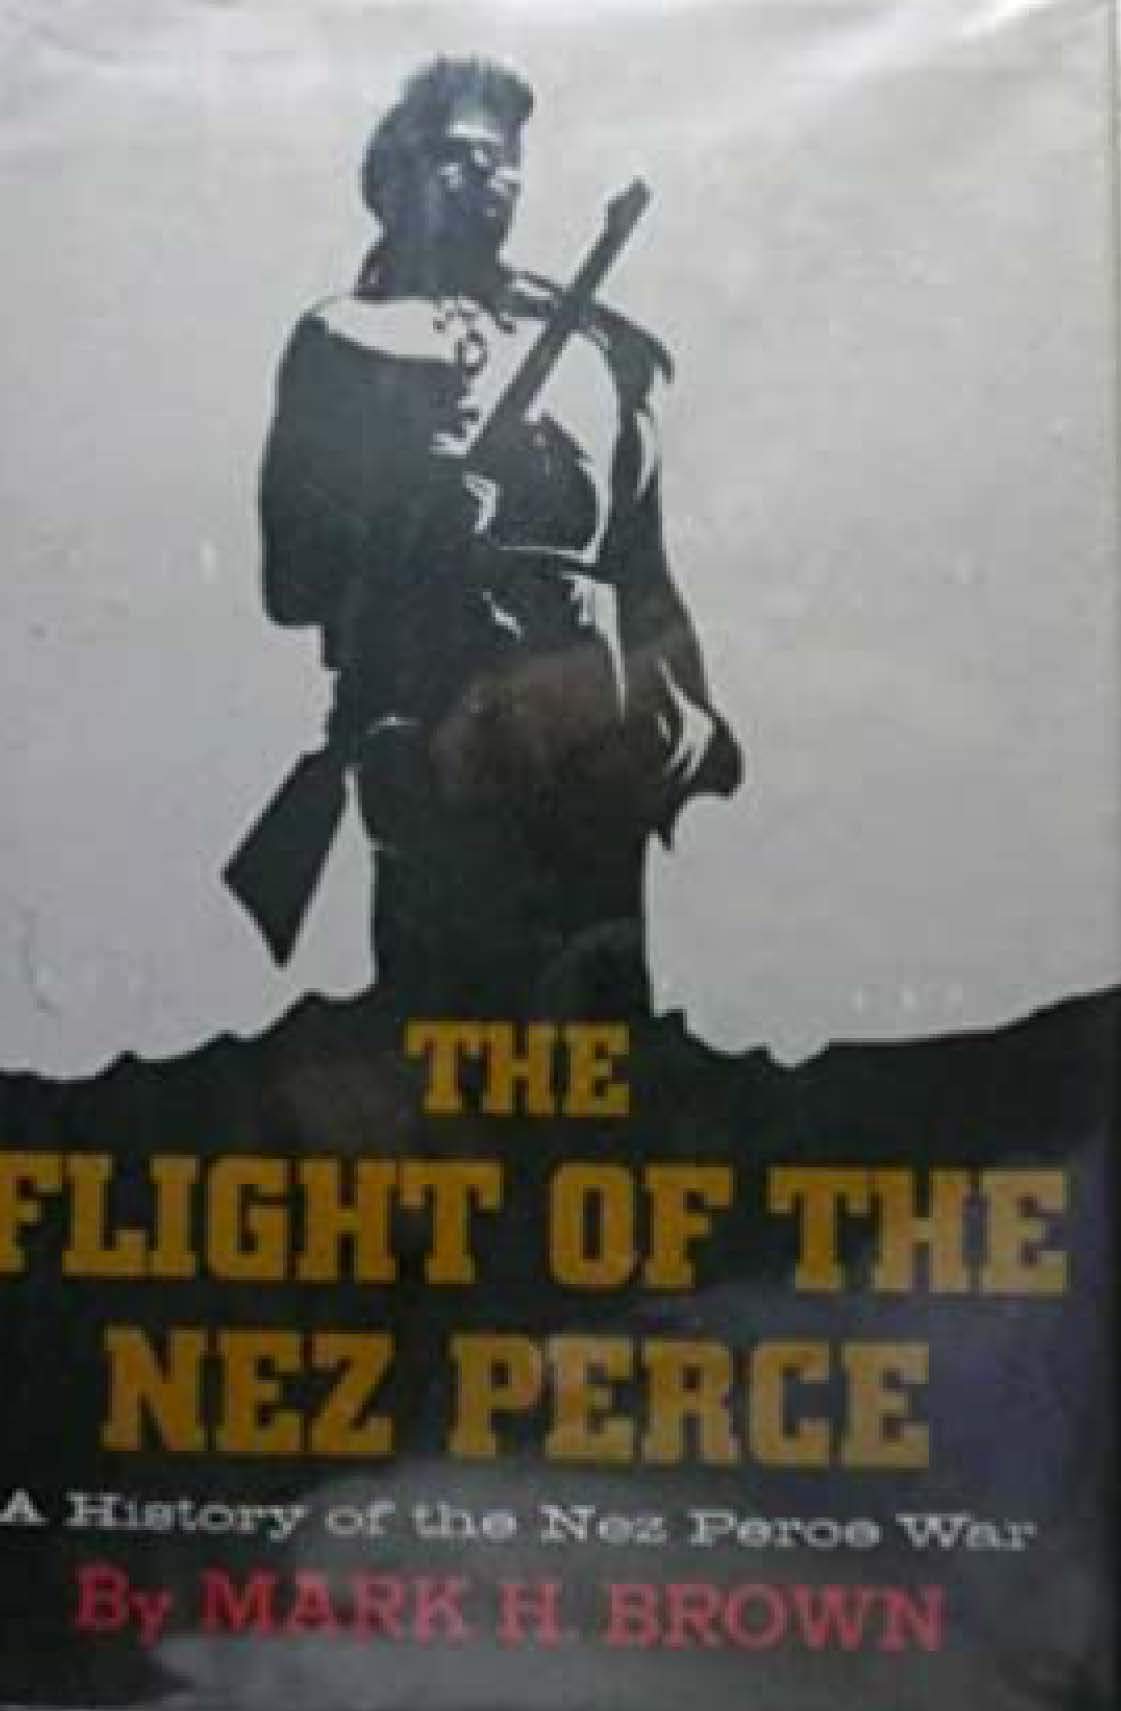 The flight of the Nez Perce (book cover)